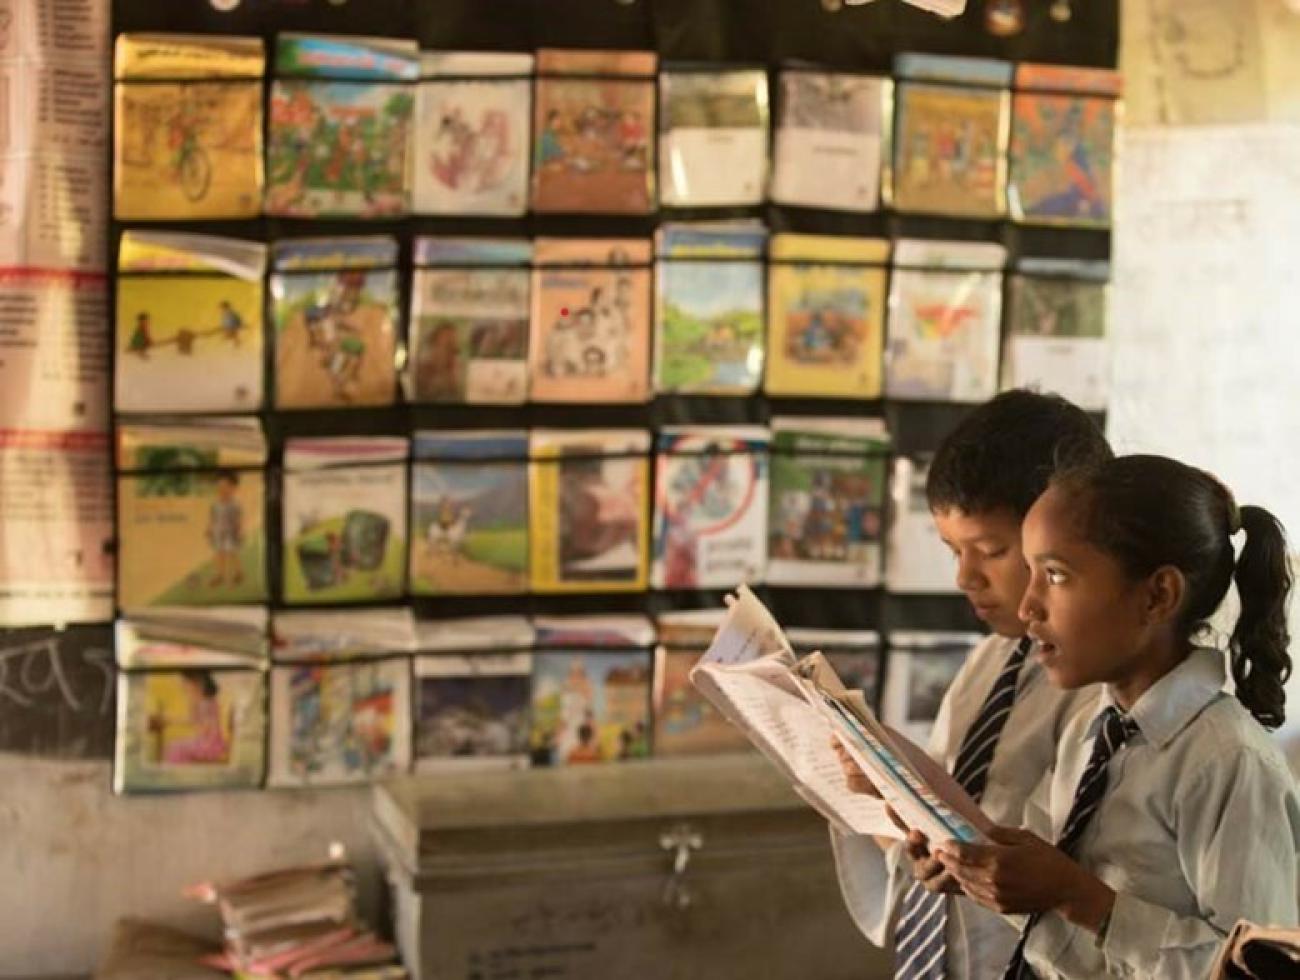 A Nepali girl and boy wearing their white school uniform and striped tie are holding a notebook and reading it in a magazine store